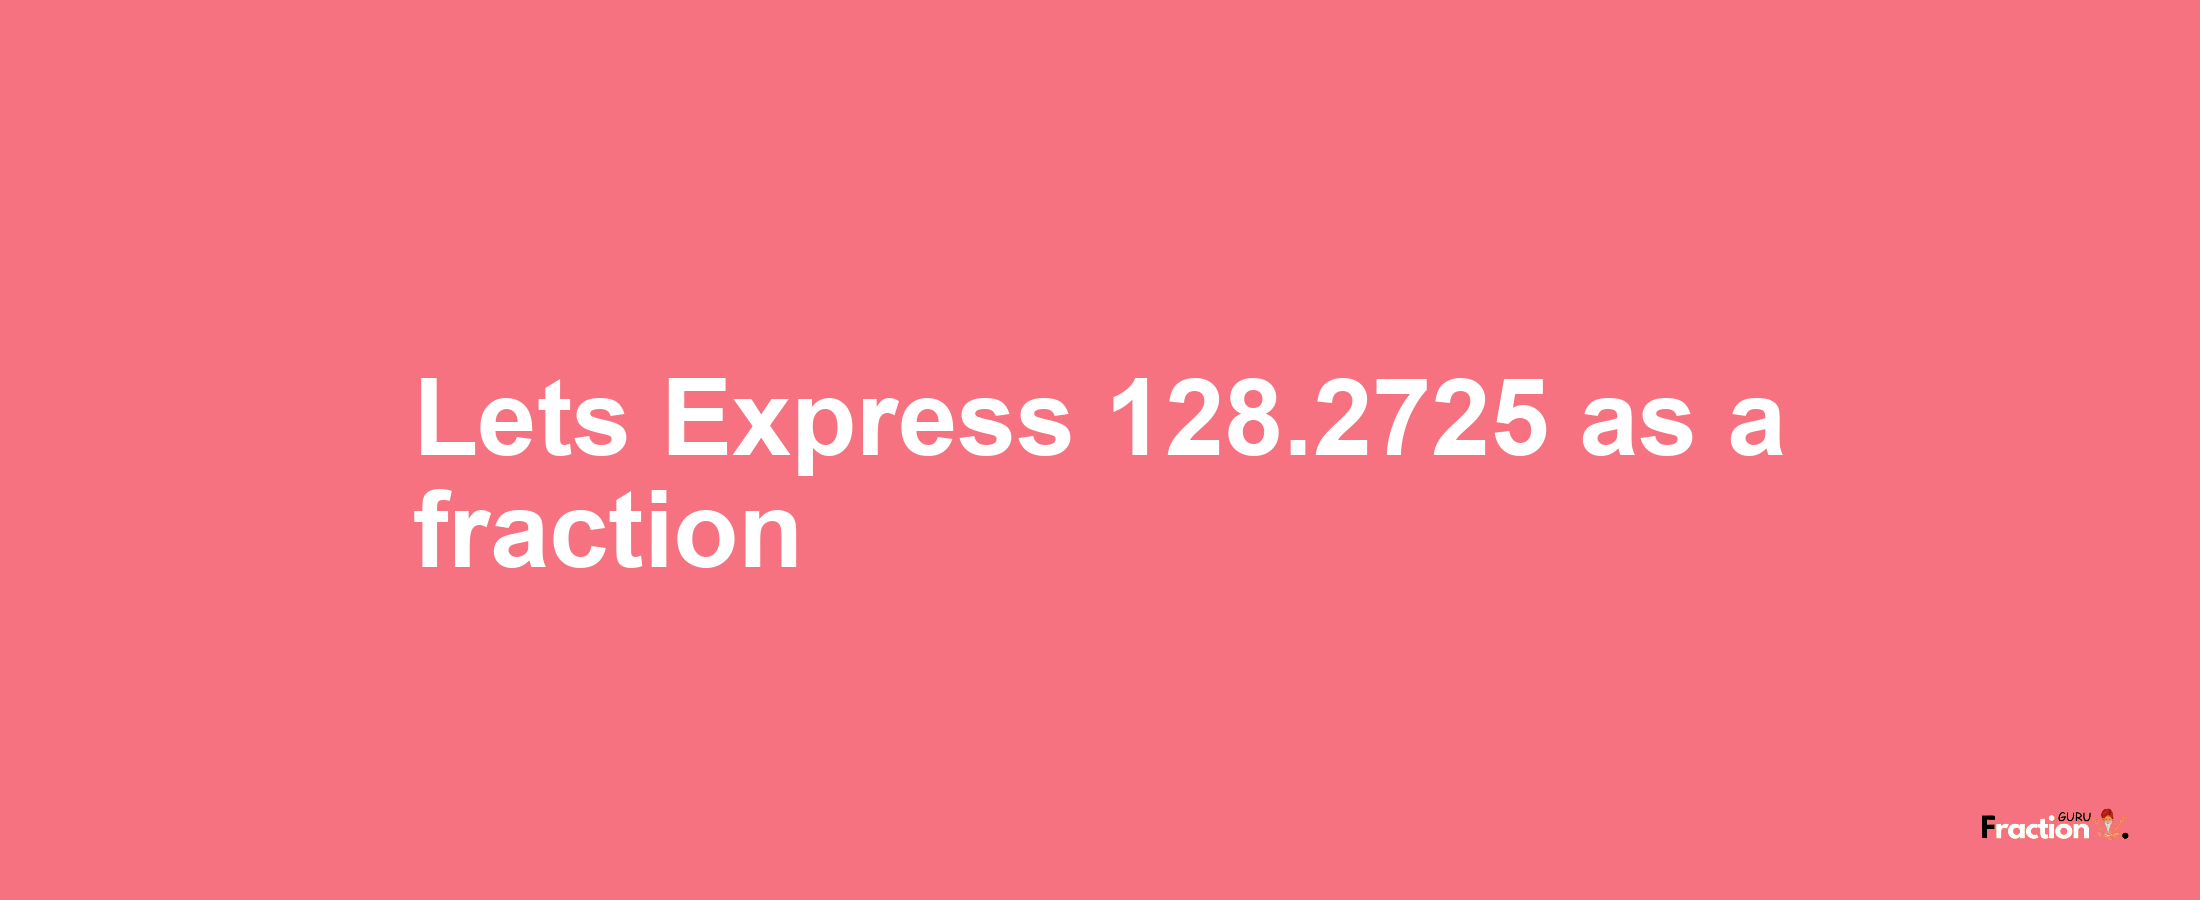 Lets Express 128.2725 as afraction